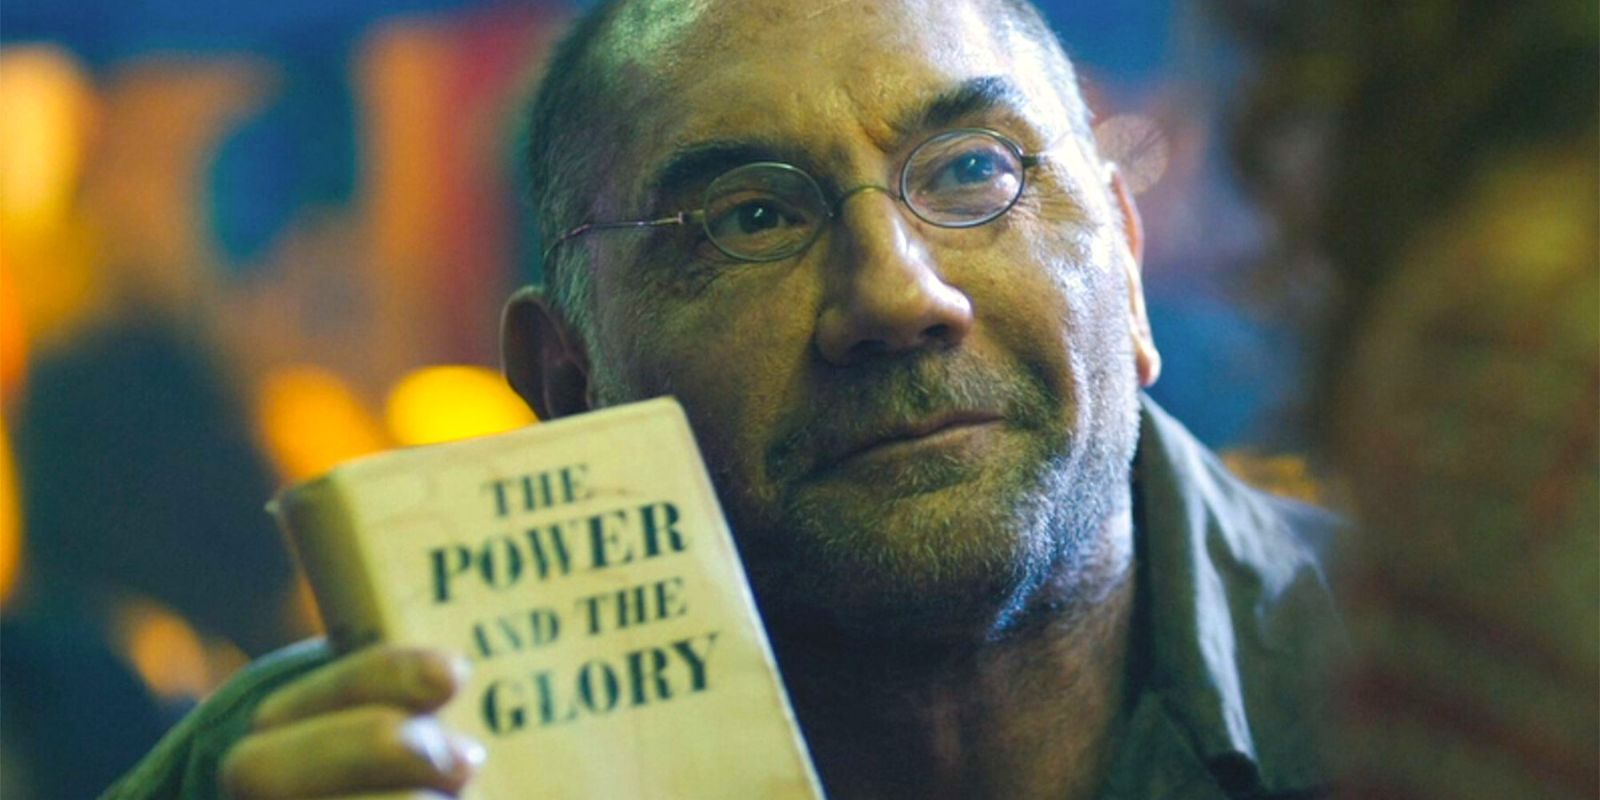 Dave Bautista in spectacles holding up a copy of the book The Power and The Glory